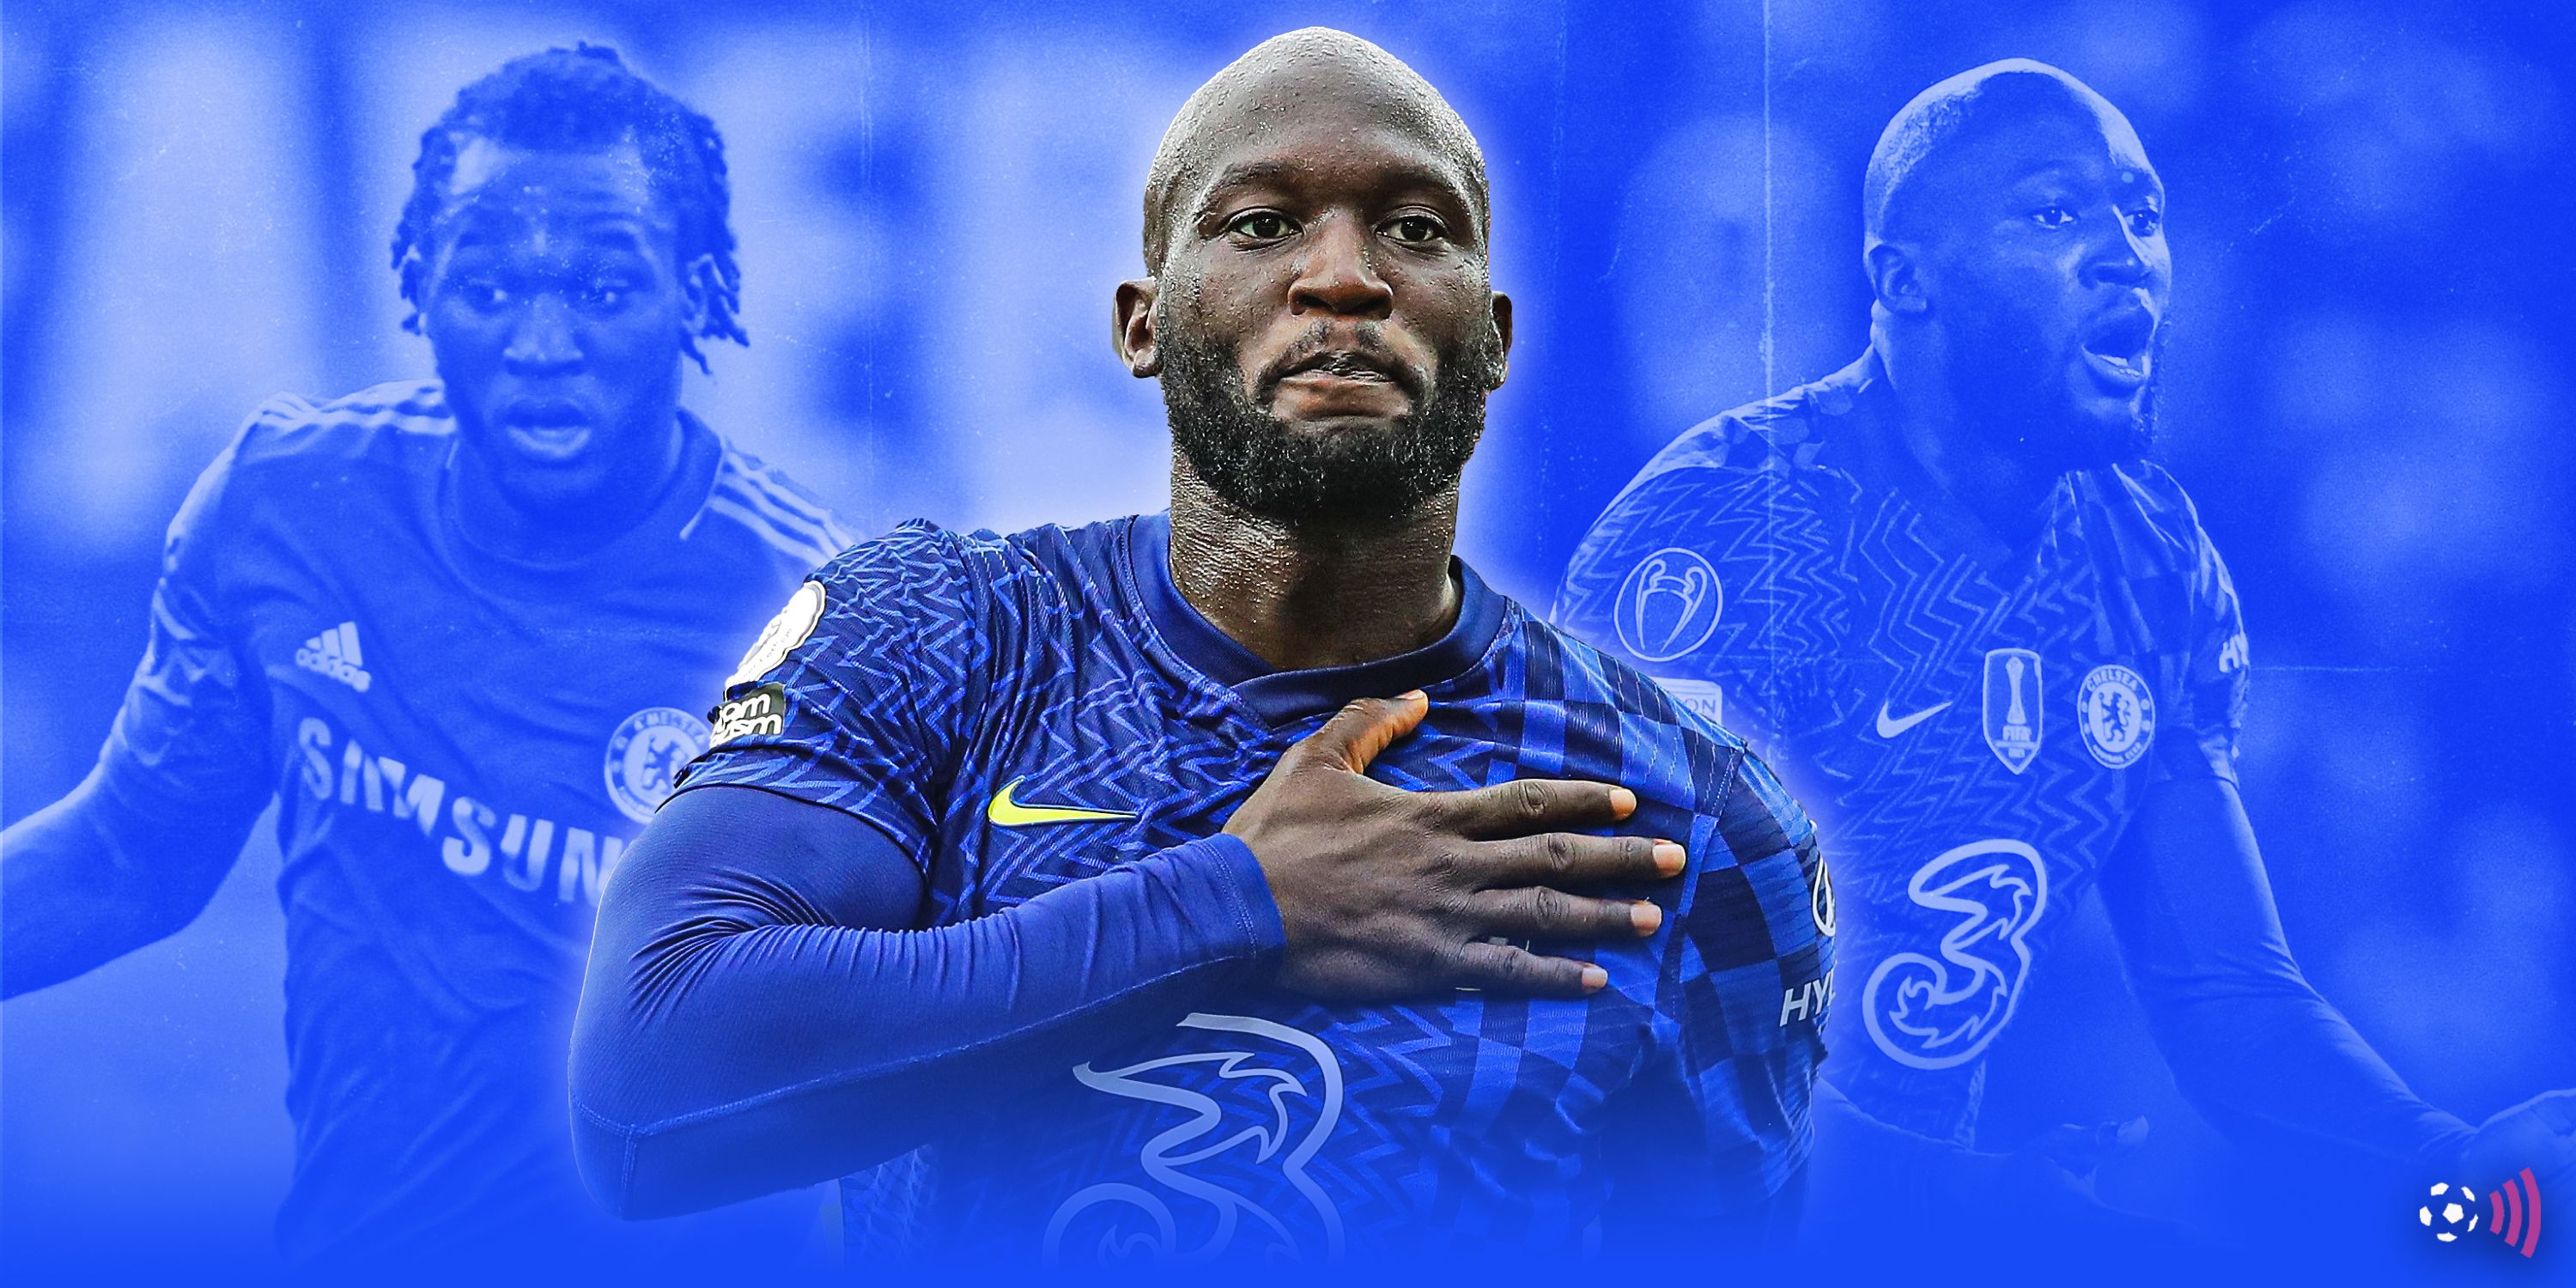 Chelsea Targets Lukaku as Replacement in Summer Transfer Shake-Up